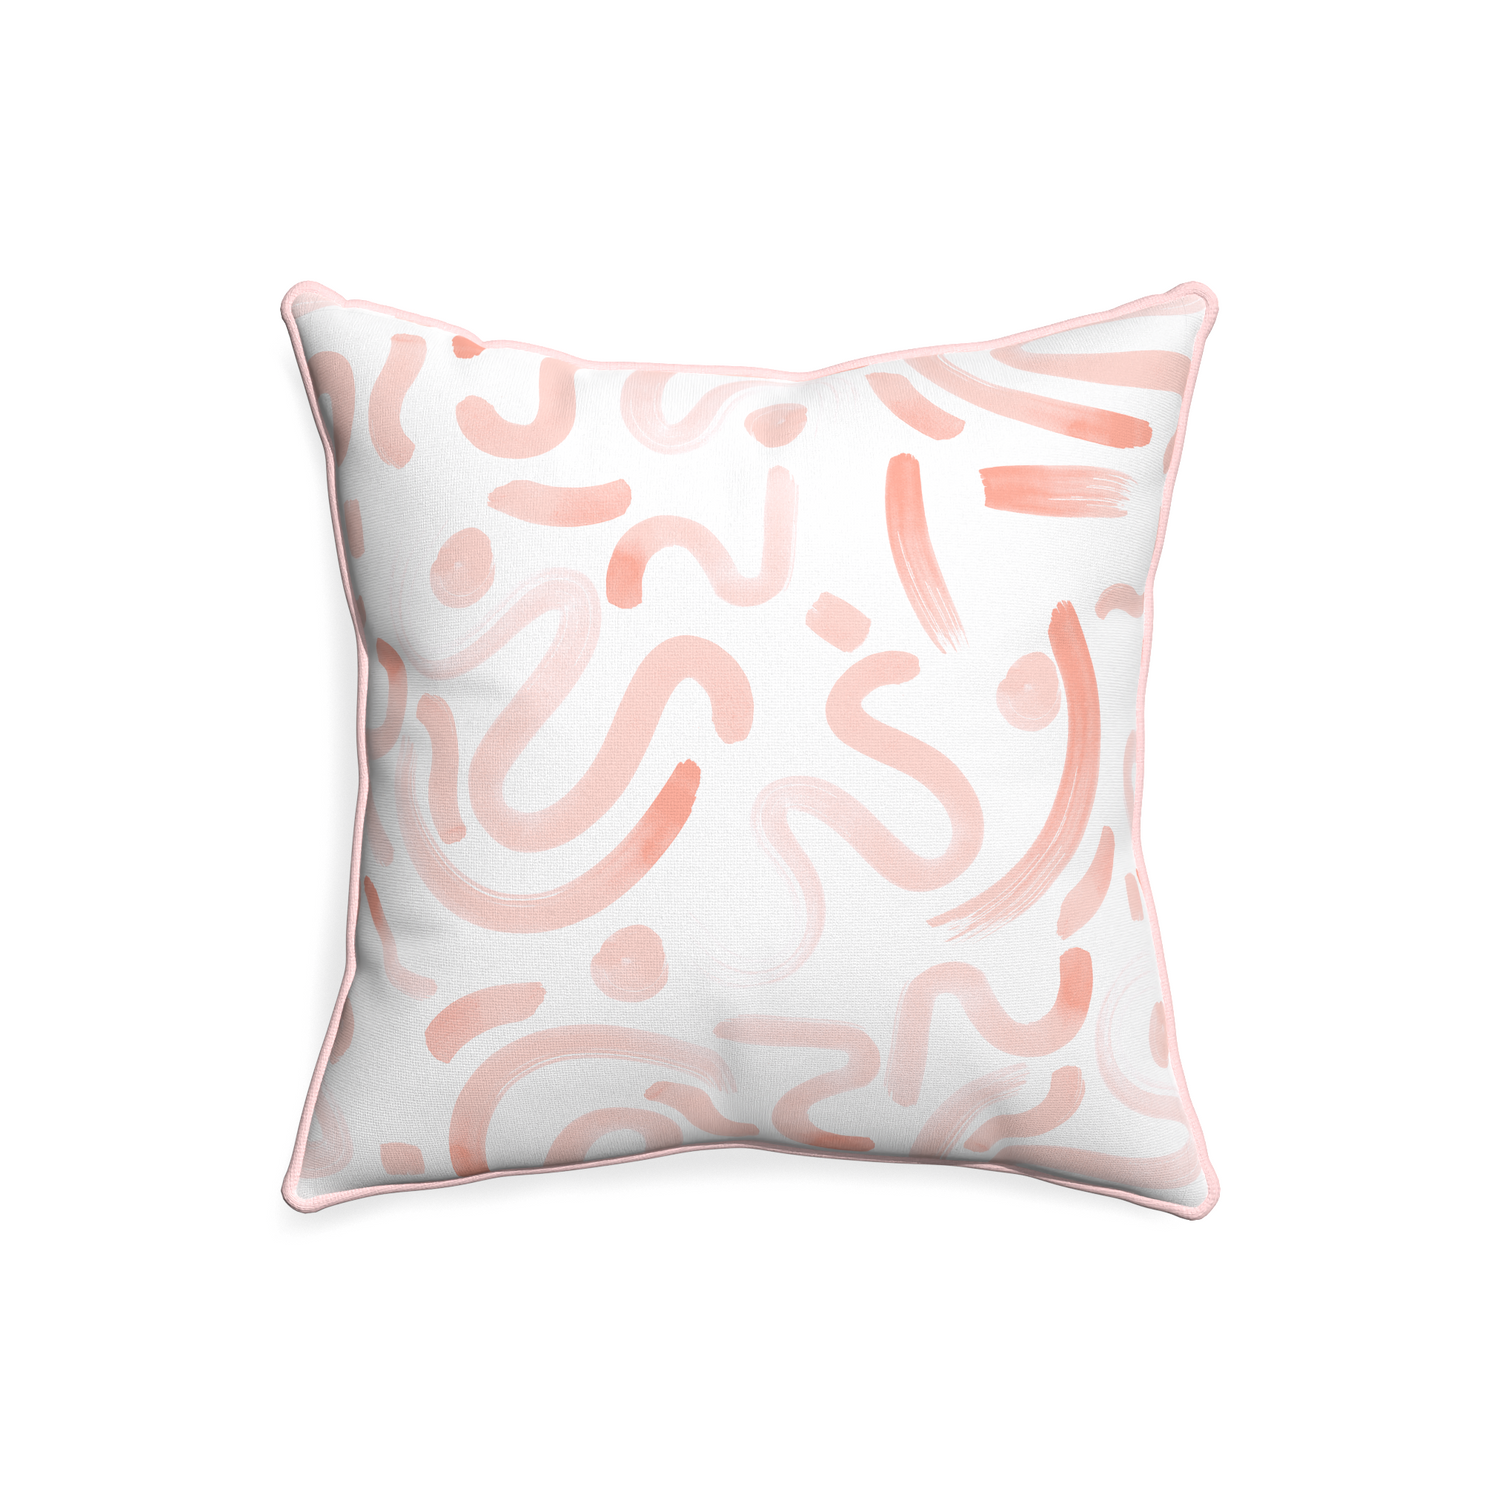 20-square hockney pink custom pink graphicpillow with petal piping on white background